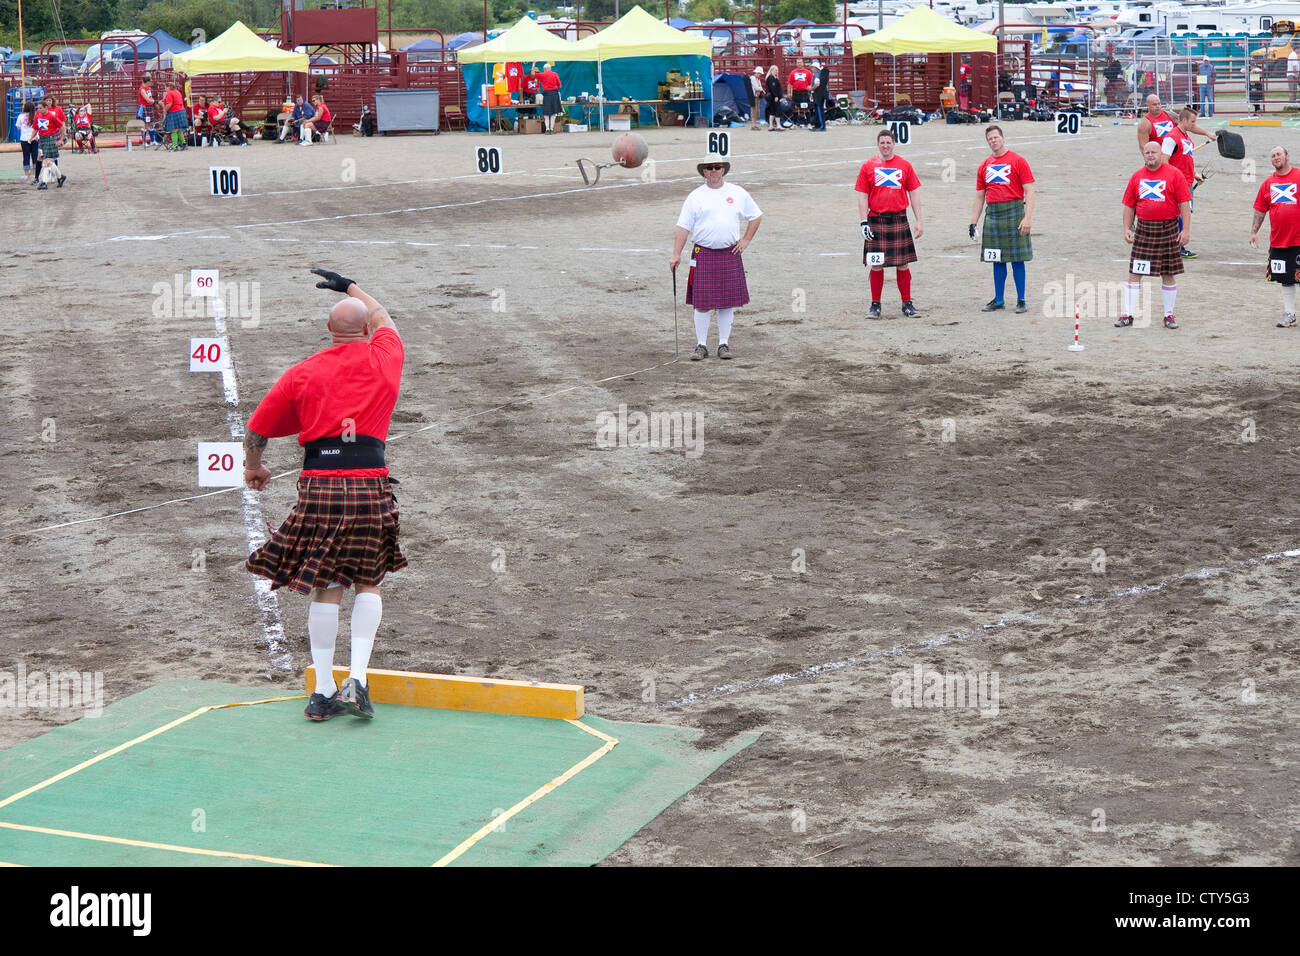 The Weight Throw Event at the 66th Annual Pacific Northwest Scottish Highland Games and Clan Gathering - Enumclaw, Washington. Stock Photo